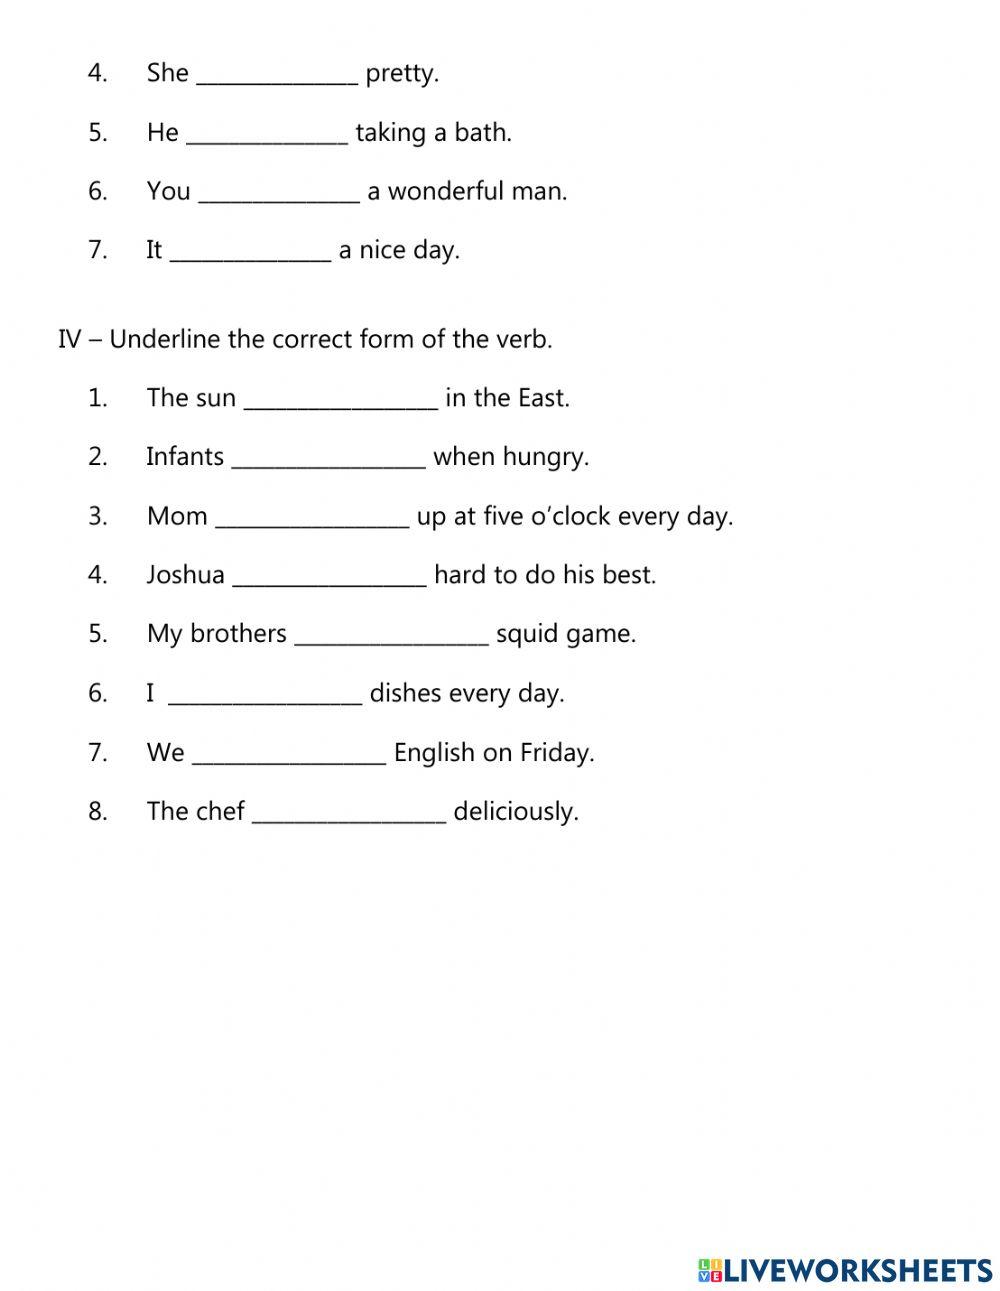 Compound word-subject verb agreement